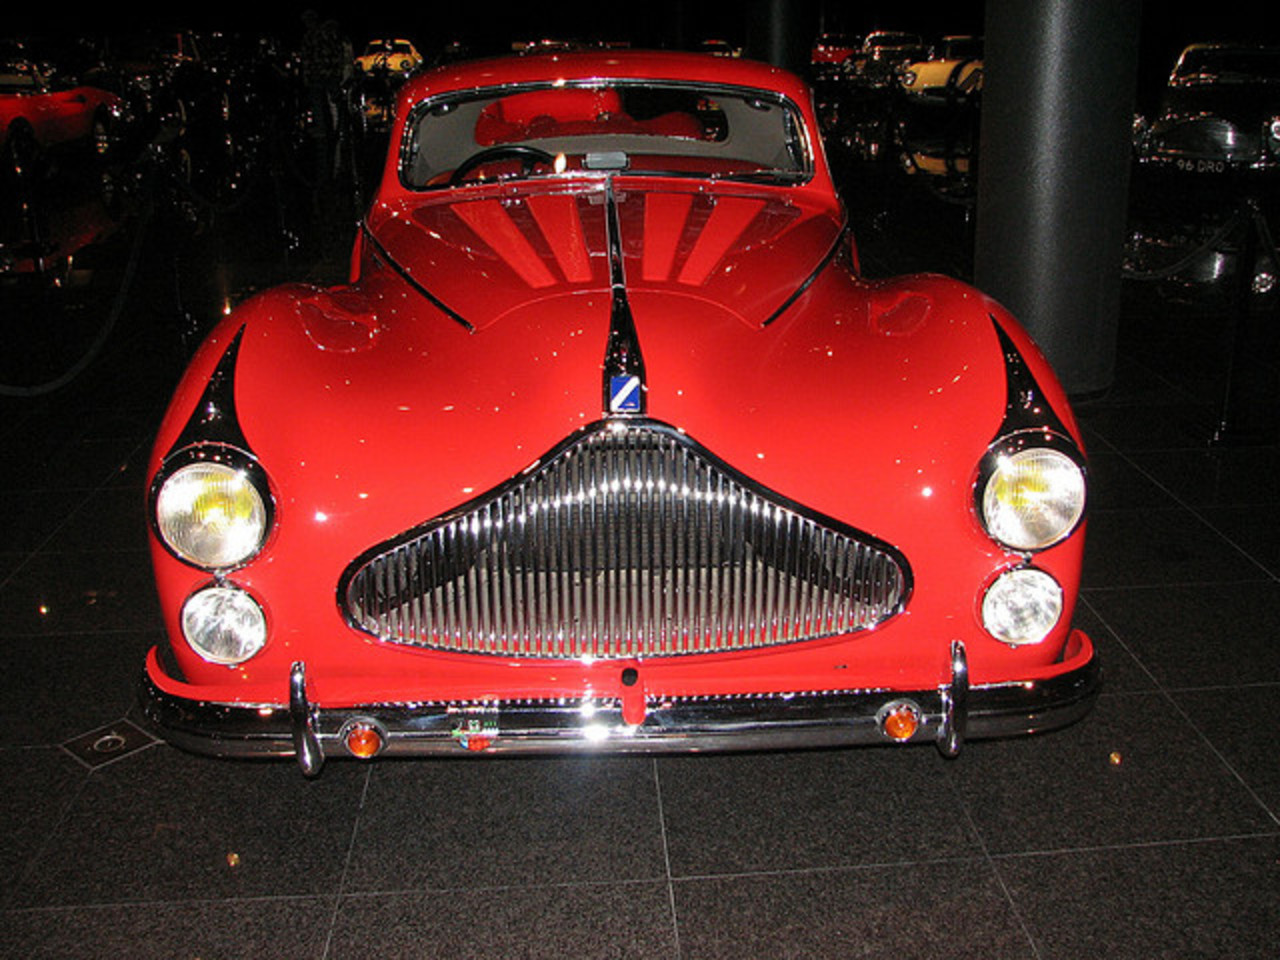 1951 Talbot-Lago Grand Sport Saoutchik Coupe (1 of 1) 1 | Flickr ...